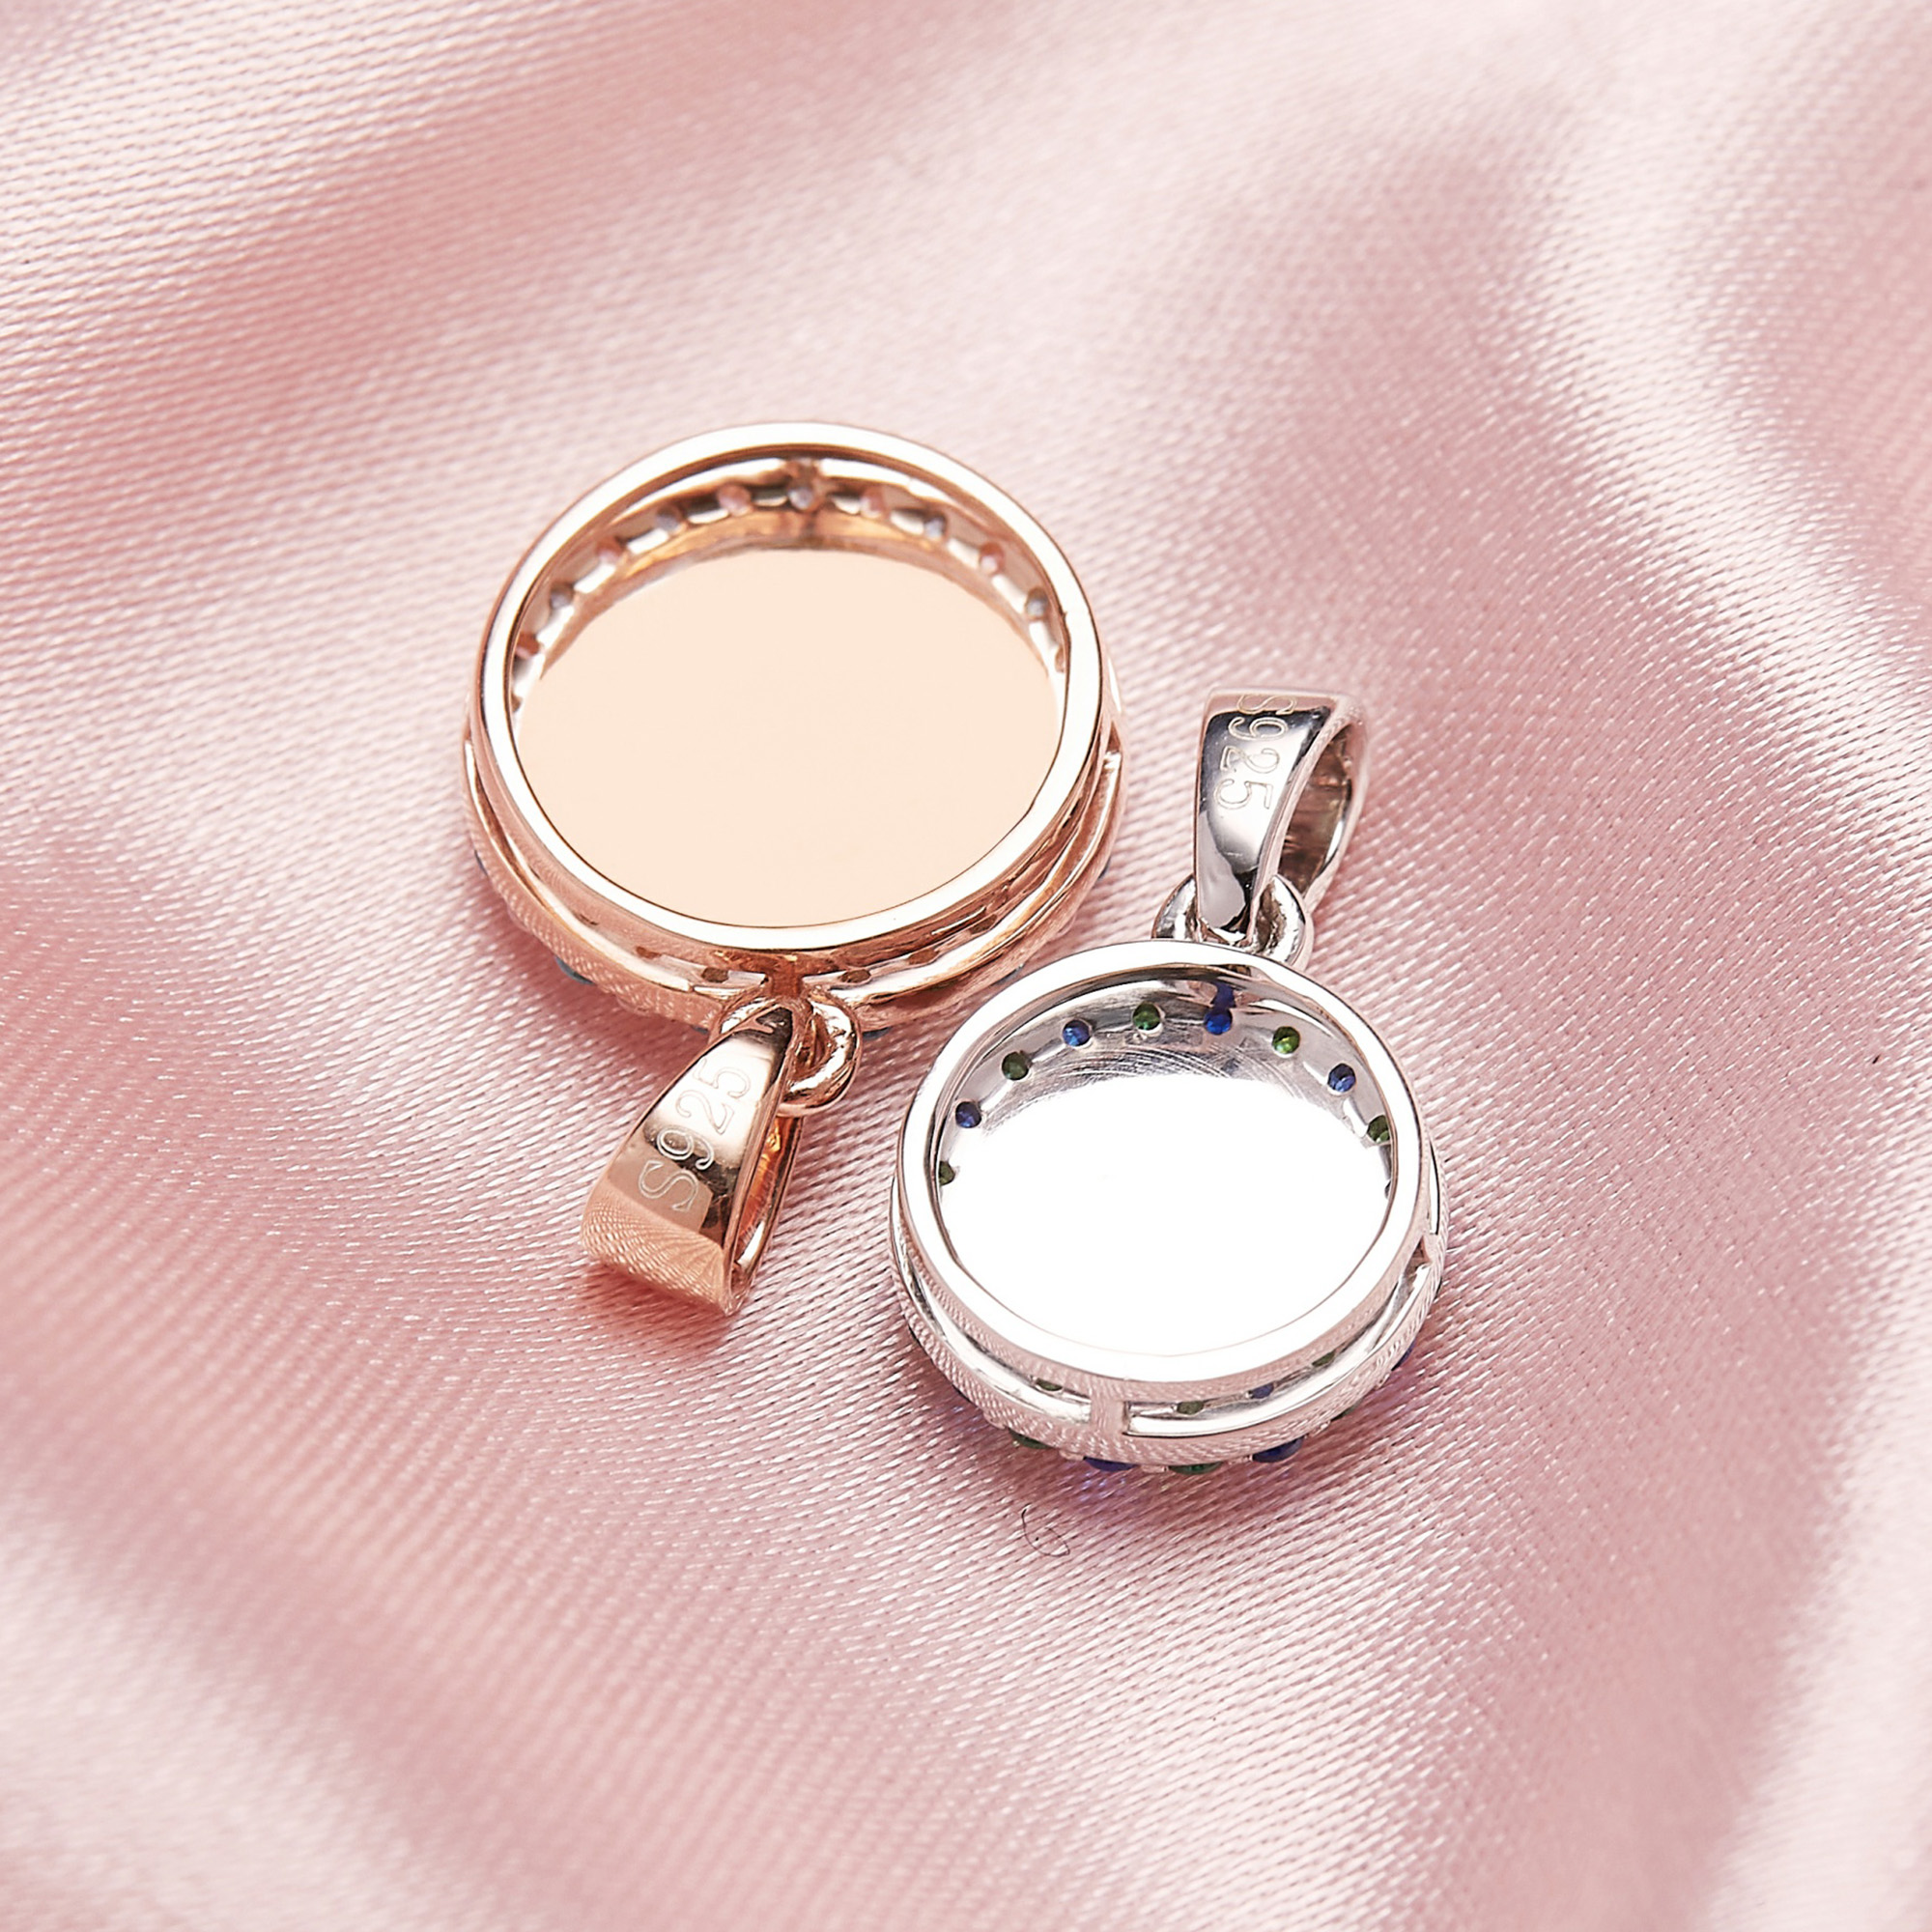 Keepsake Breast Milk Resin Round Pendant Bezel Settings,Solid Back 925 Sterling Silver Rose Gold Plated Pendant,Pave CZ Stone Charm,DIY Pendant Supplies 1431251 - Click Image to Close